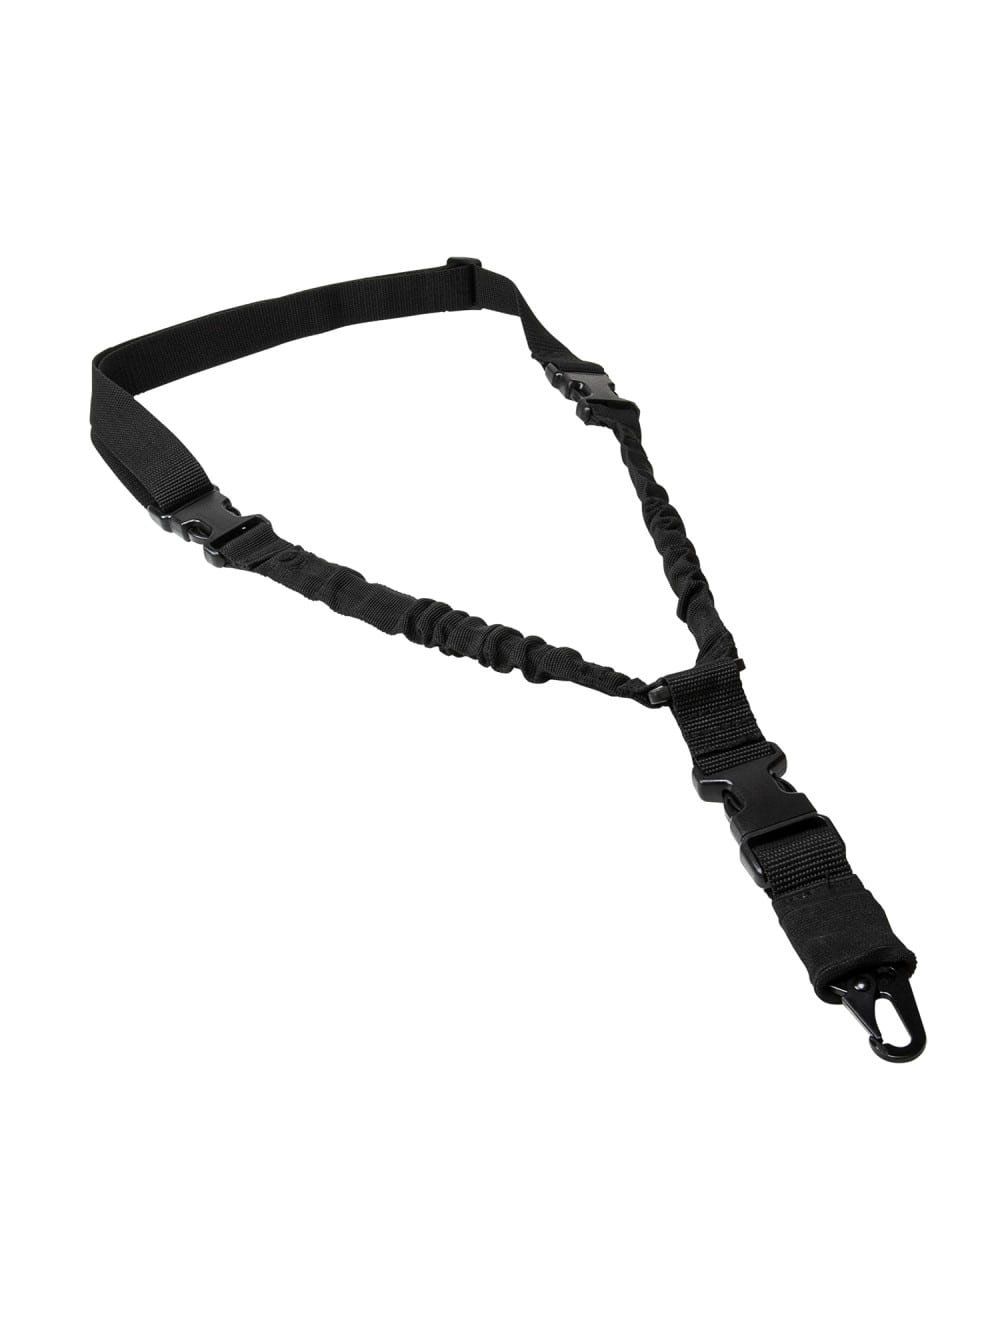 Deluxe Single Point Sling